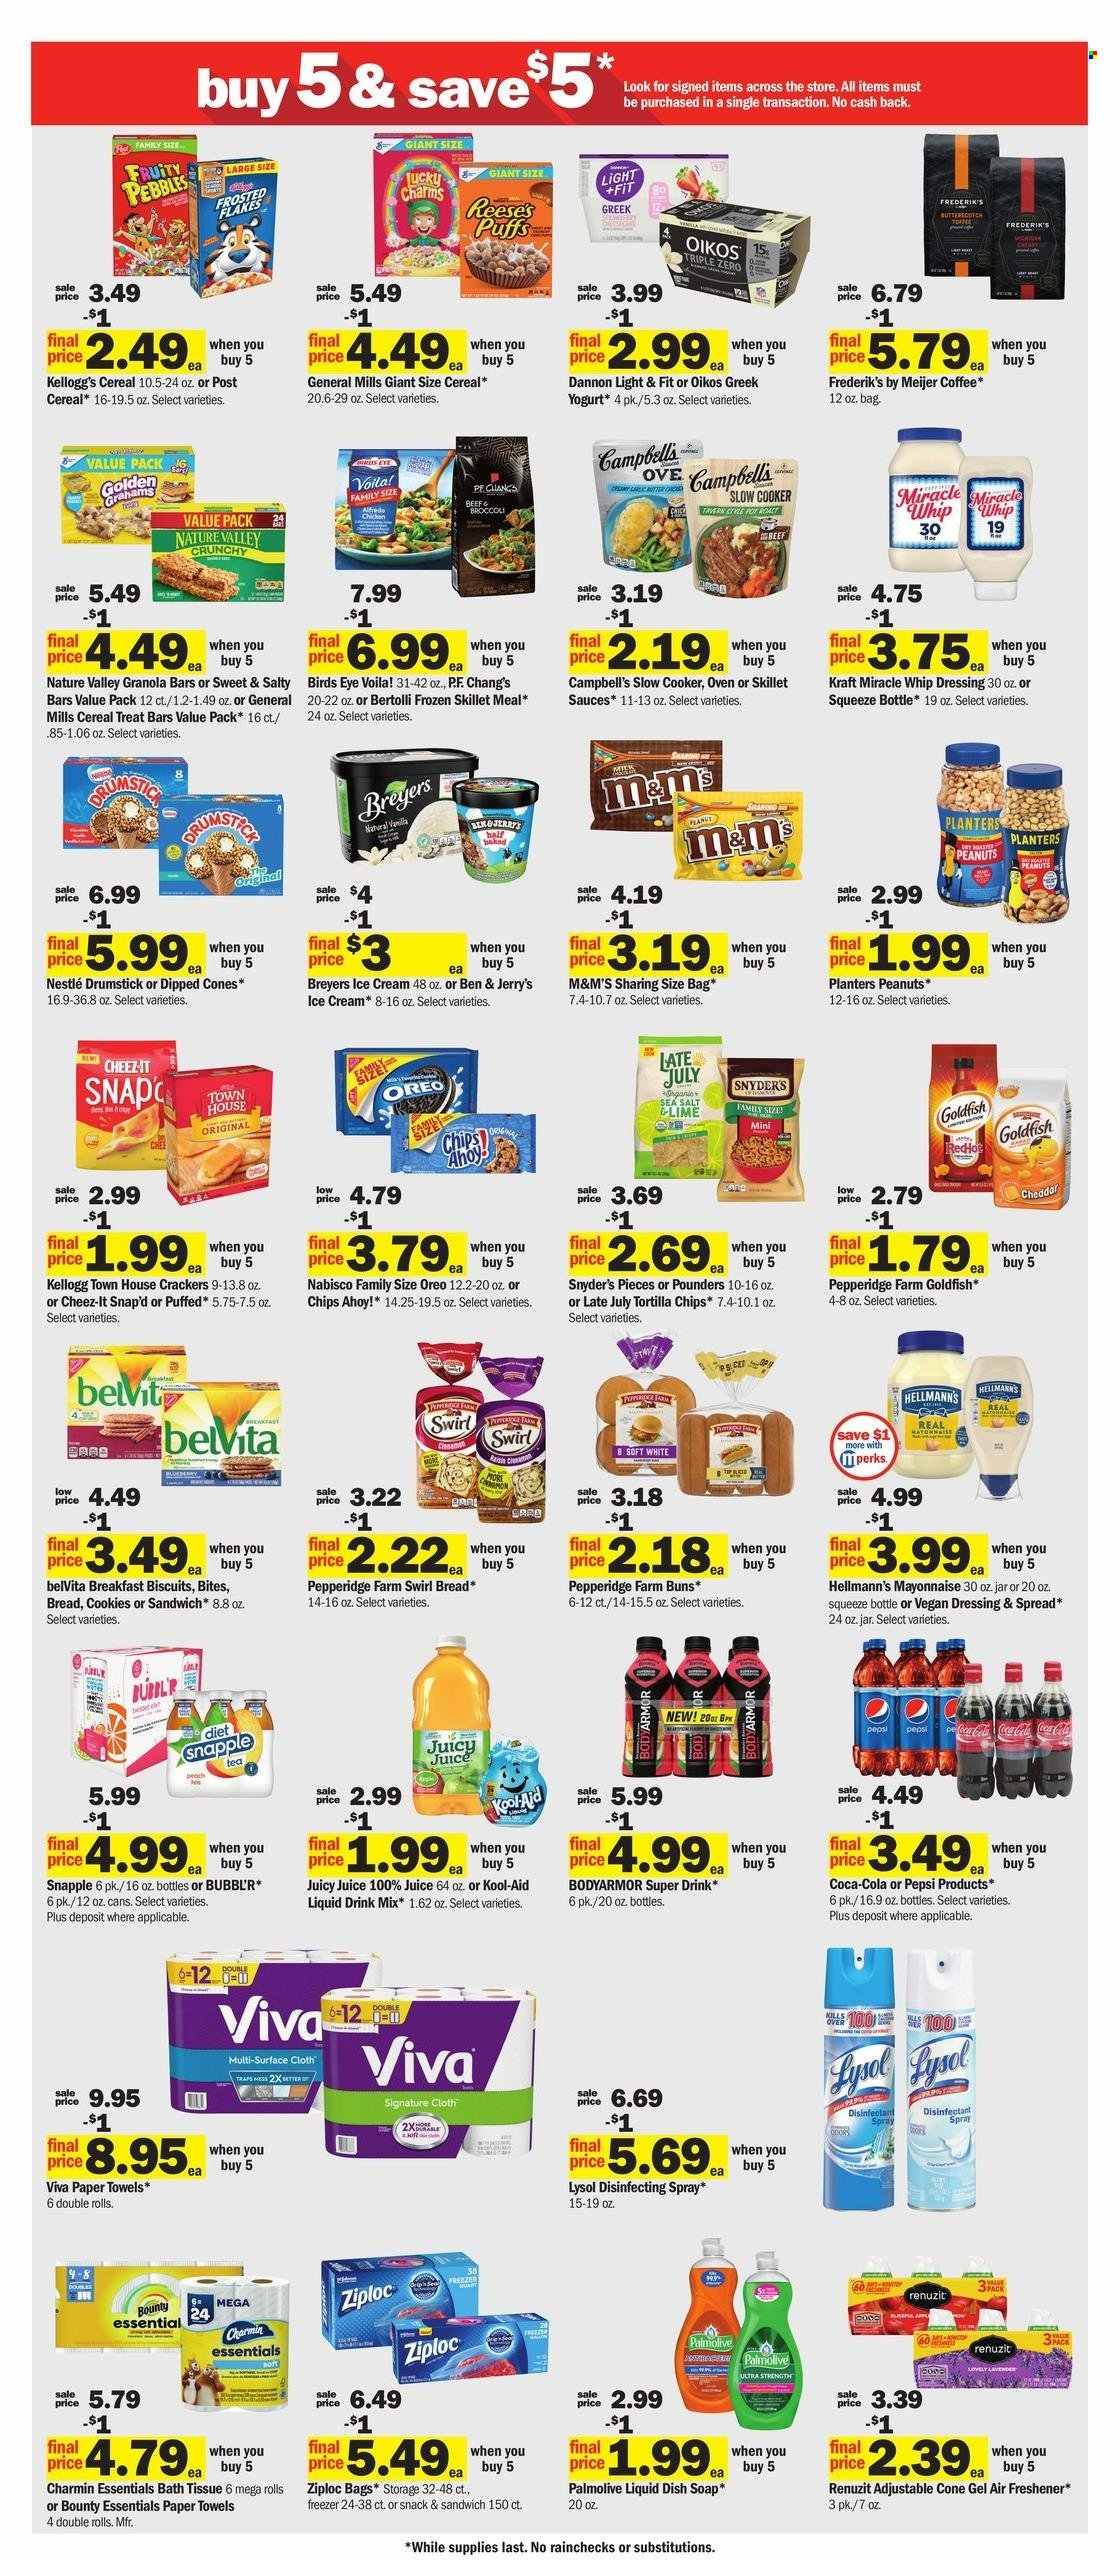 thumbnail - Meijer Flyer - 01/29/2023 - 02/04/2023 - Sales products - buns, puffs, broccoli, Campbell's, Bird's Eye, Kraft®, Bertolli, greek yoghurt, Oreo, yoghurt, Oikos, Dannon, milk, mayonnaise, Miracle Whip, Hellmann’s, ice cream, Reese's, Ben & Jerry's, butterscotch, cookies, Nestlé, Bounty, M&M's, crackers, Kellogg's, biscuit, Chips Ahoy!, tortilla chips, Goldfish, Cheez-It, cereals, granola bar, Fruity Pebbles, belVita, Nature Valley, dressing, peanuts, Planters, Coca-Cola, Pepsi, juice, Snapple, coffee, bath tissue, kitchen towels, paper towels, Charmin, desinfection, Lysol, Palmolive, soap, Ziploc, pot, Renuzit, air freshener, oven, slow cooker. Page 5.